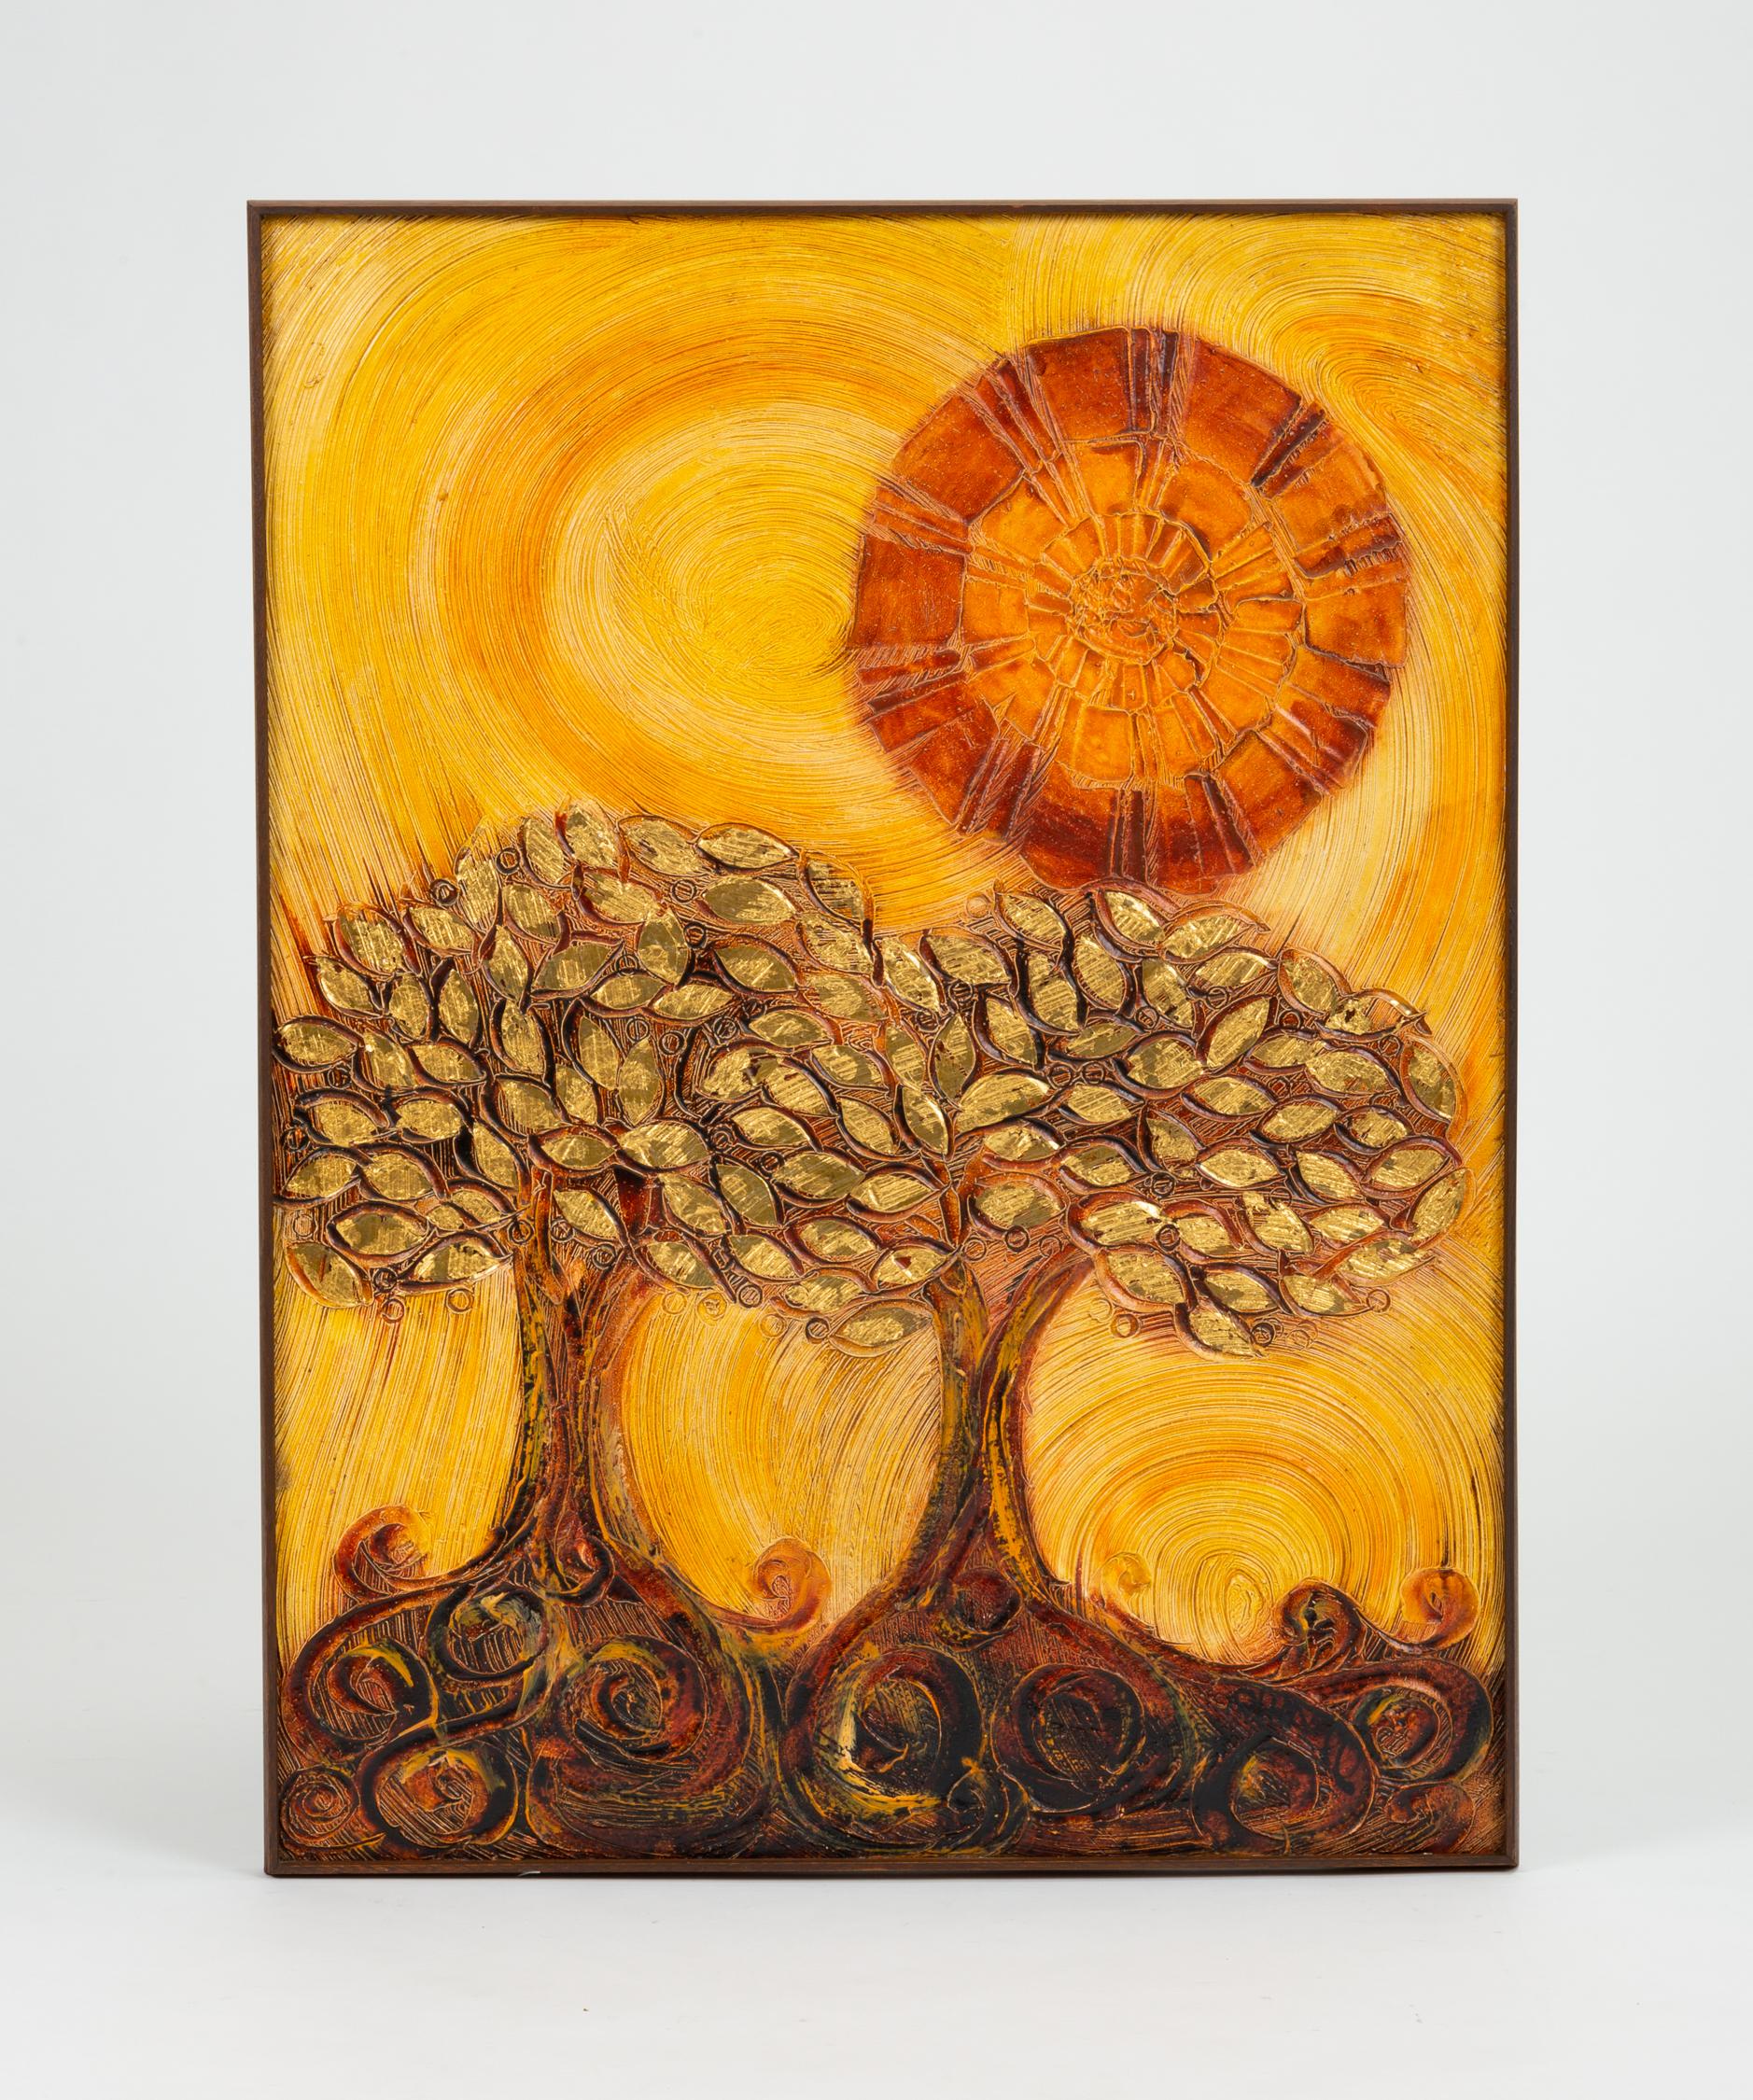 A large scale pastoral scene rendered in plaster relief, with paint and gold leaf applied, depicting two trees with curling roots in the foreground with an abstractly geometric sun shining above. The materiality of the plaster lends a sense of